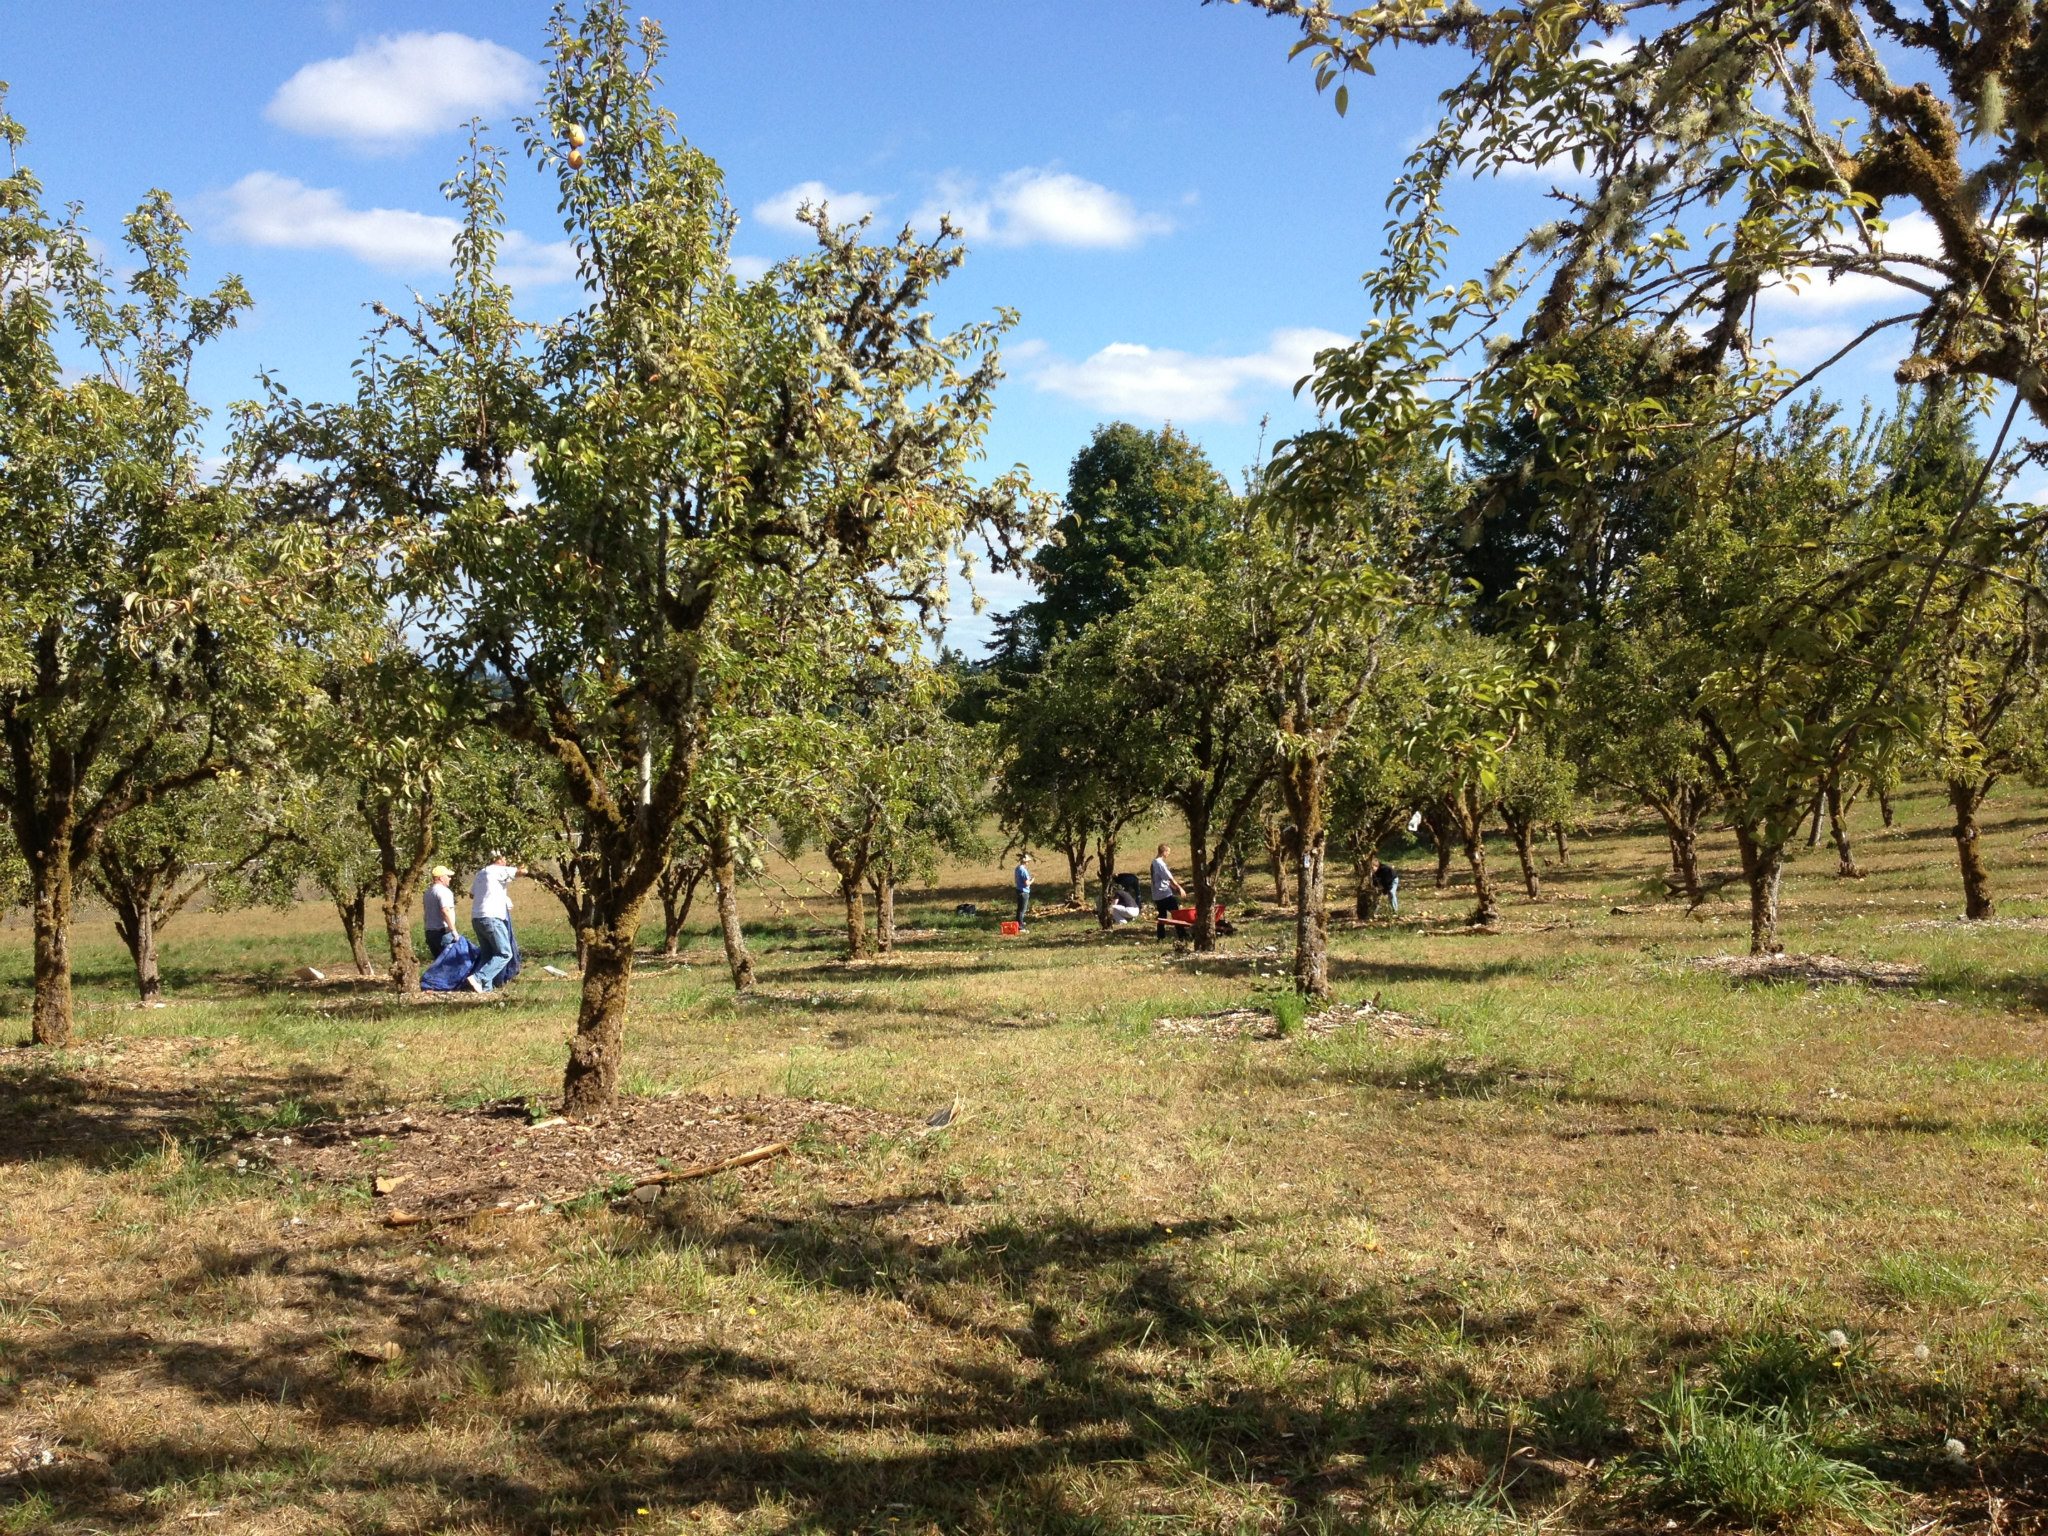 Does Your Town Have a Public Orchard?